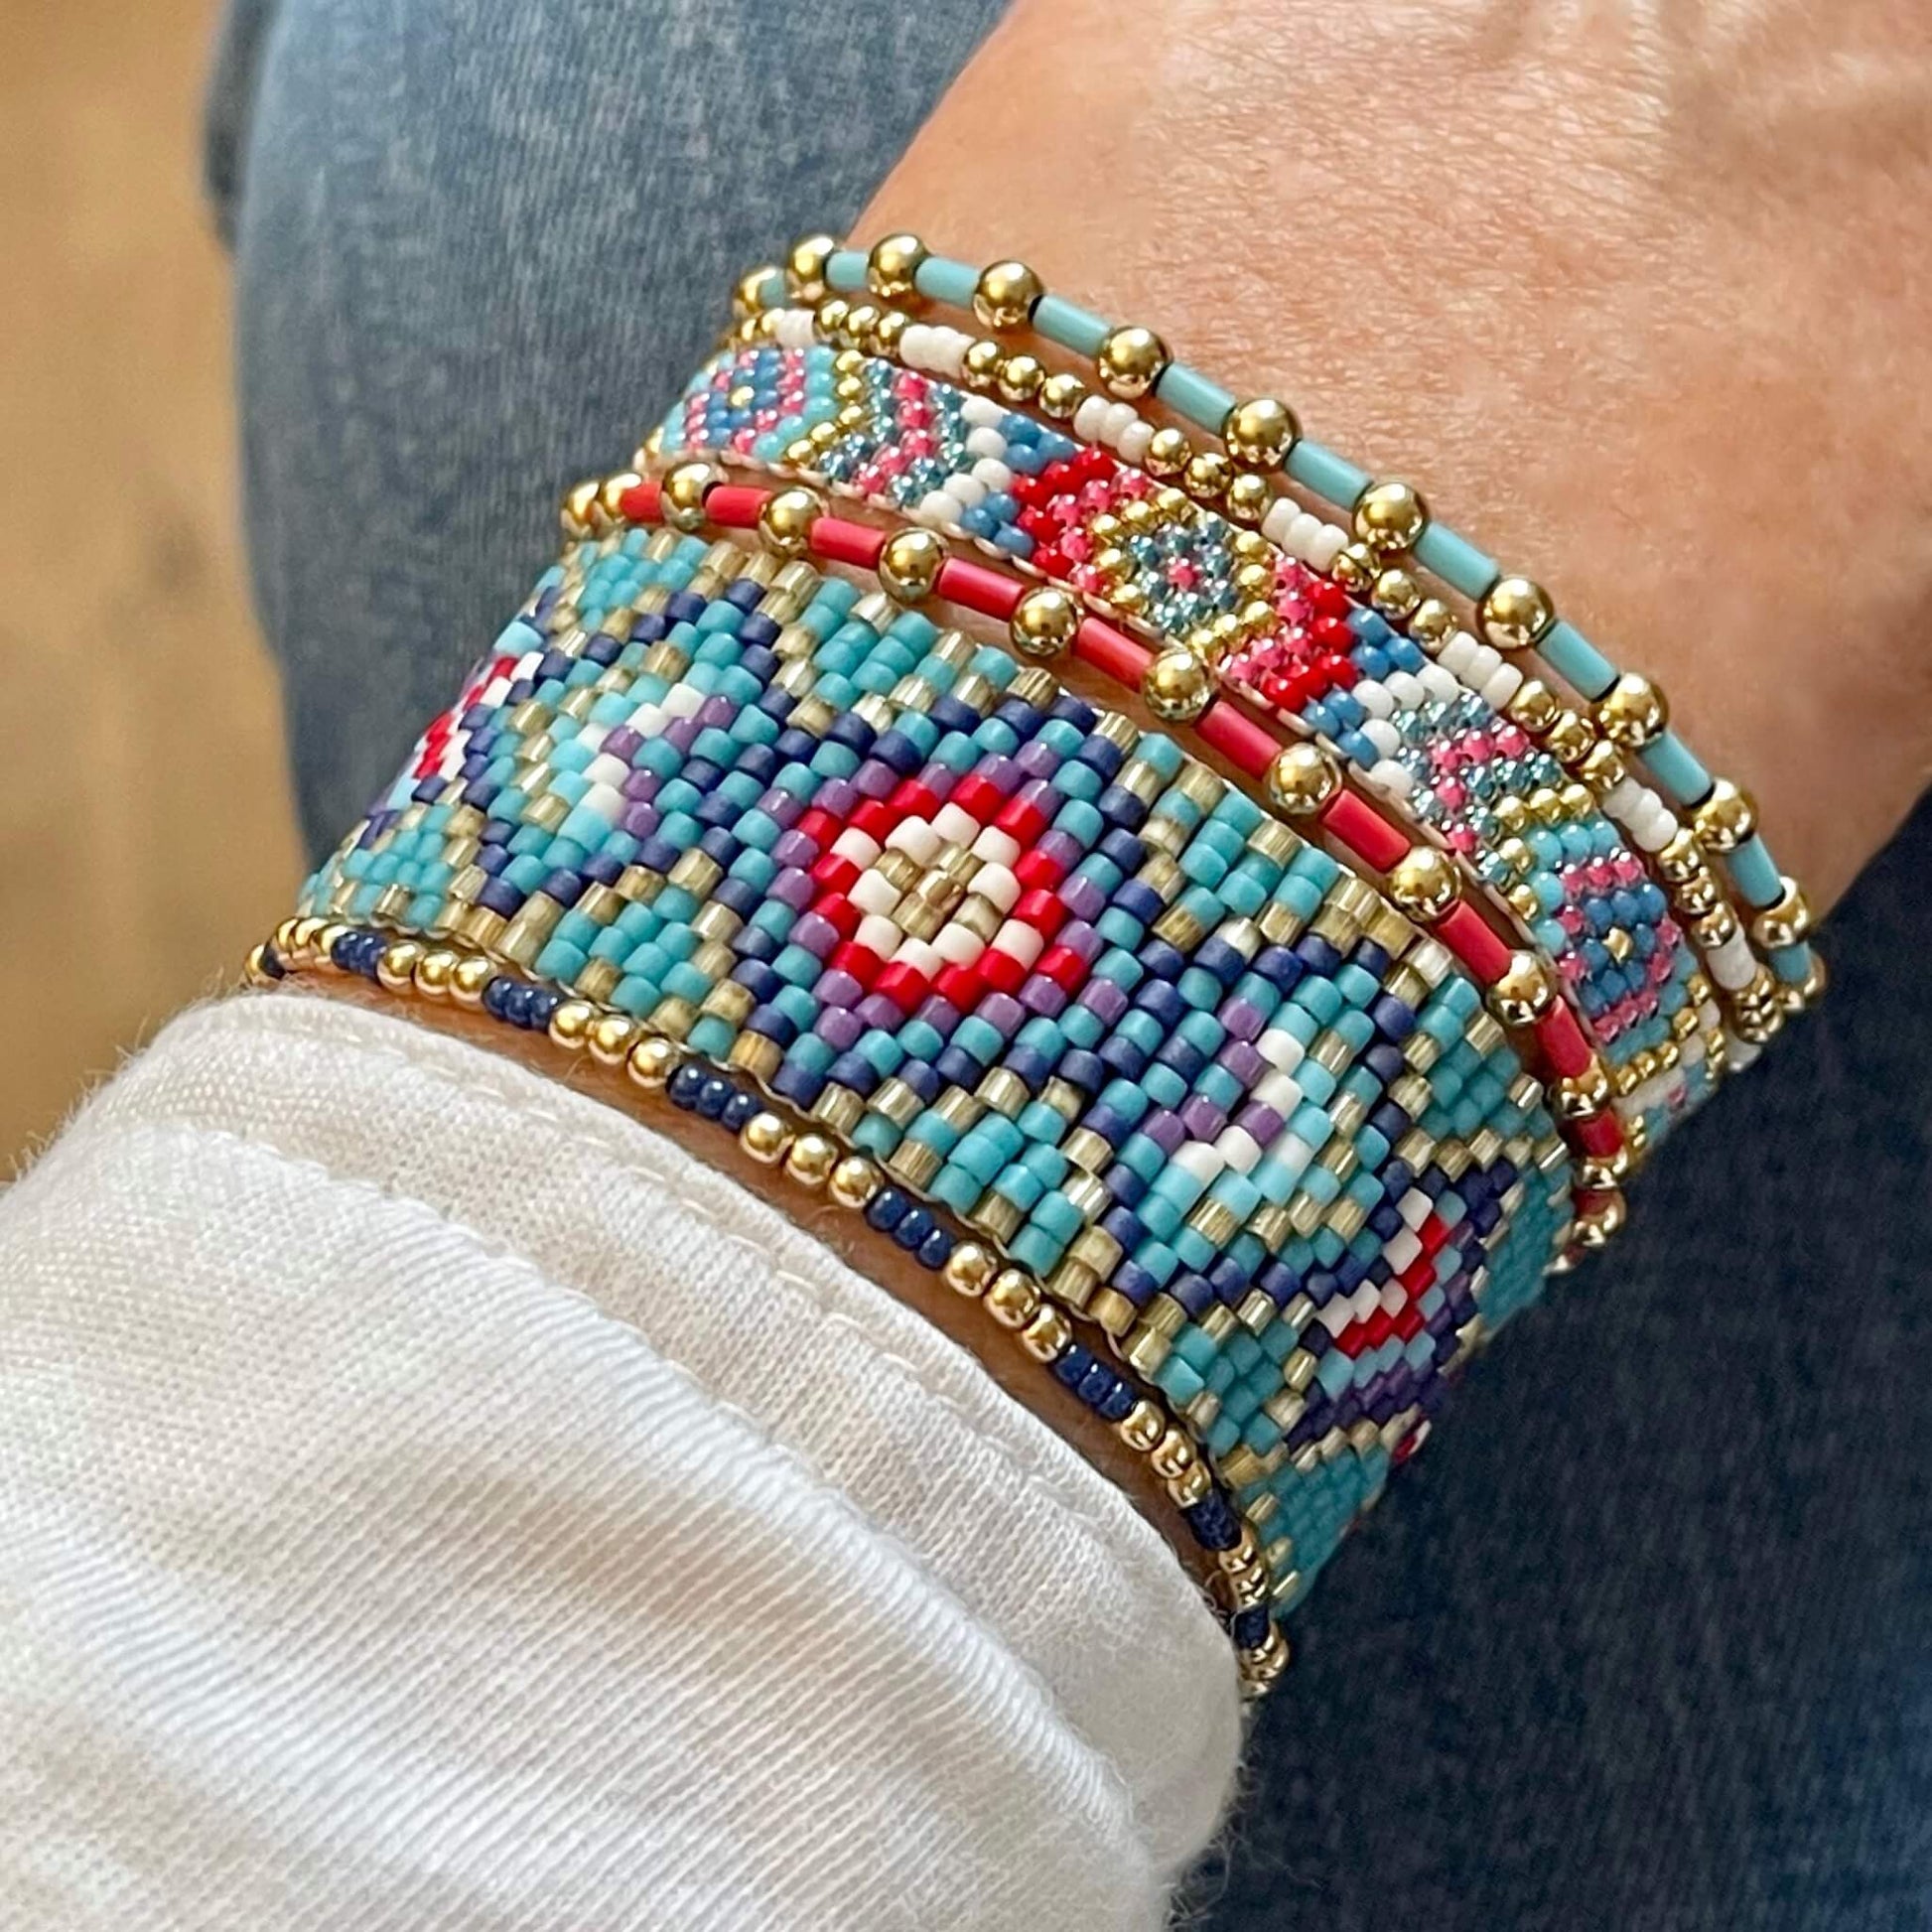 Woven and stretch bright red and blue beaded bracelet stack of 6. With 2 peyote stitch bracelets and 4 gold and seed bead stretch bracelets.